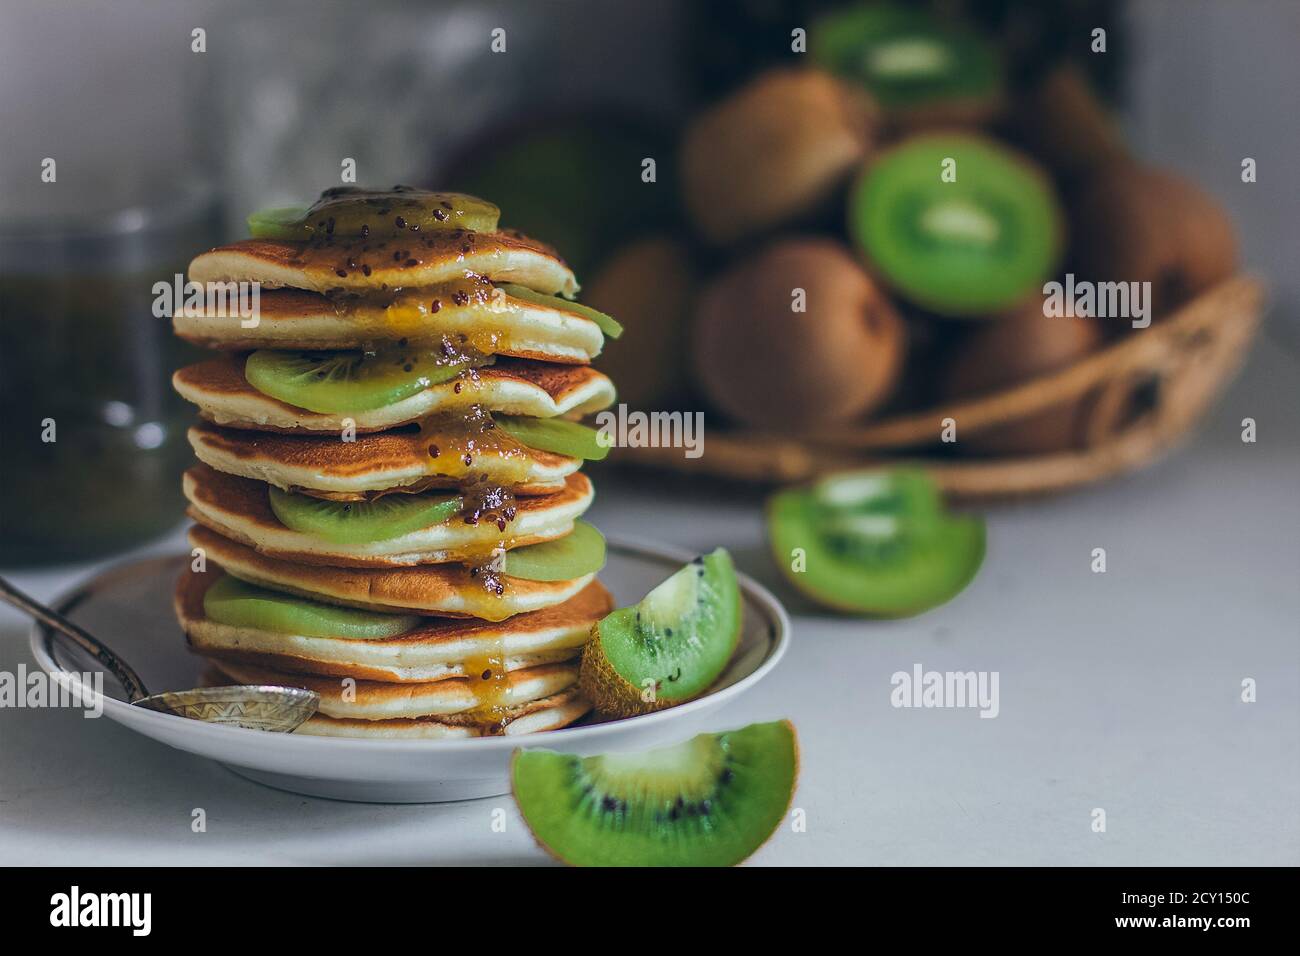 Plate of pancakes dripping with kiwi jam with kiwi pieces. Shrovetide Maslenitsa Butter Week festival meal. Shrove Tuesday. Pancake day Stock Photo